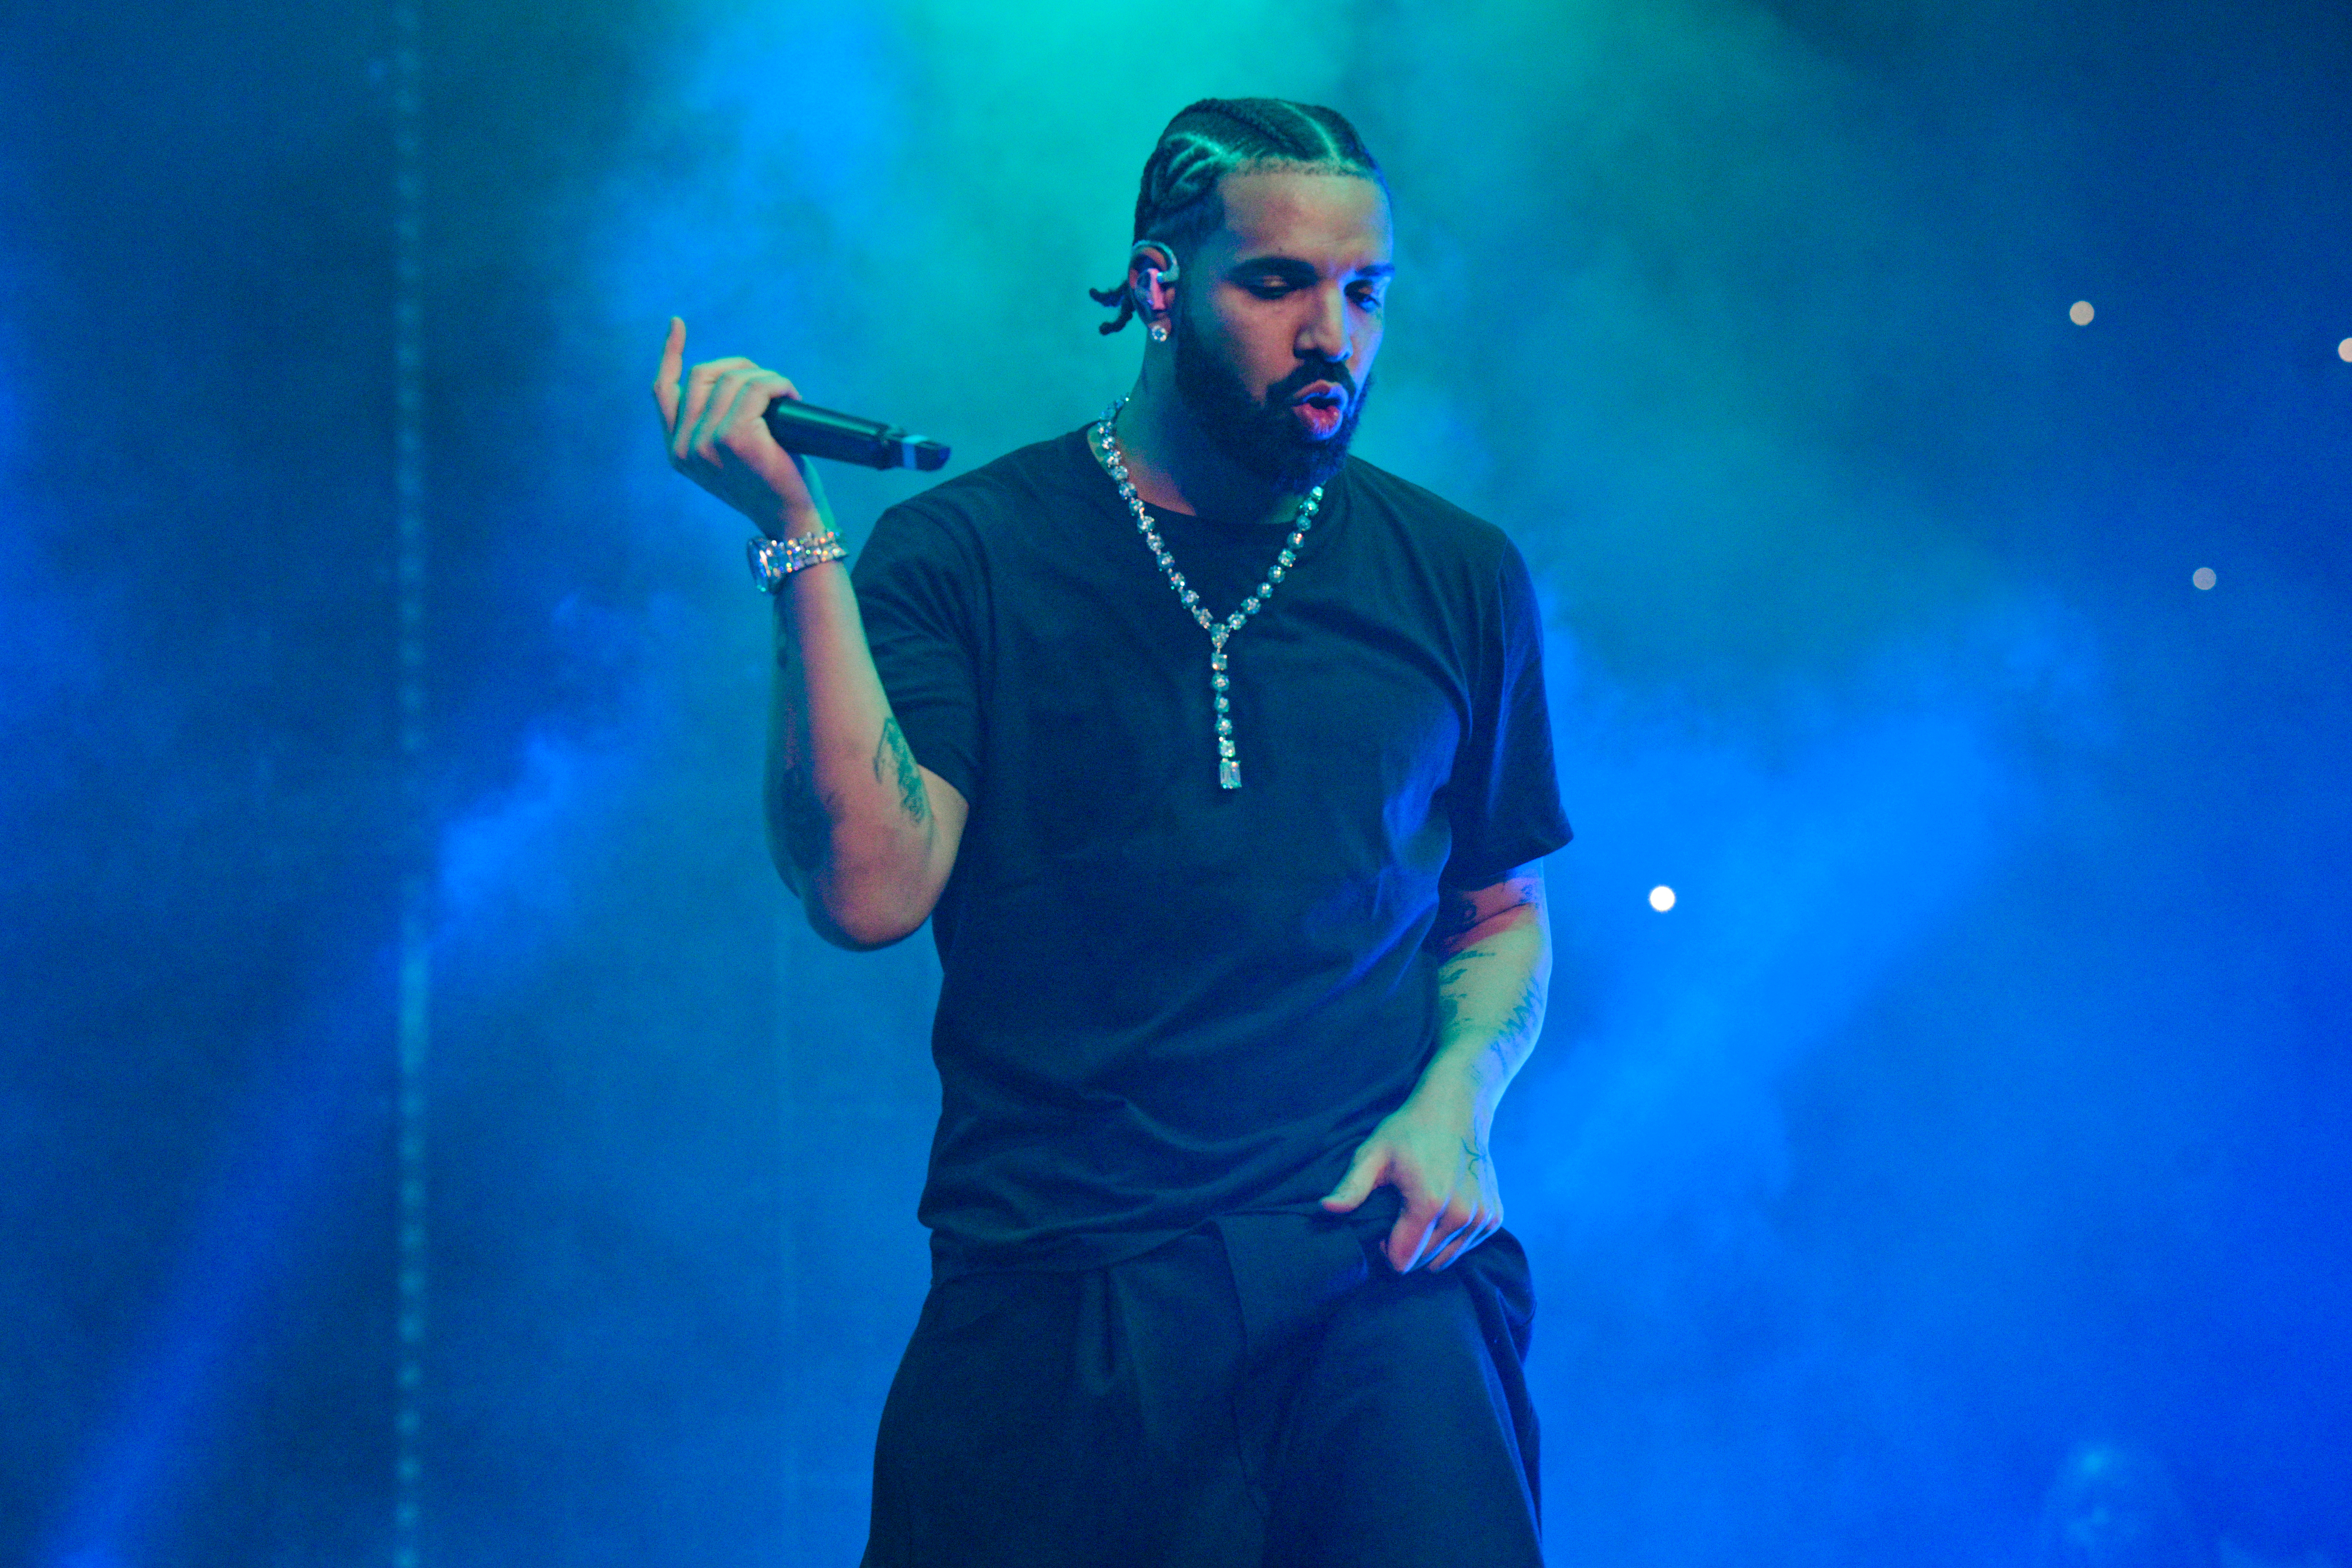 Drake on stage holding a microphone during a performance